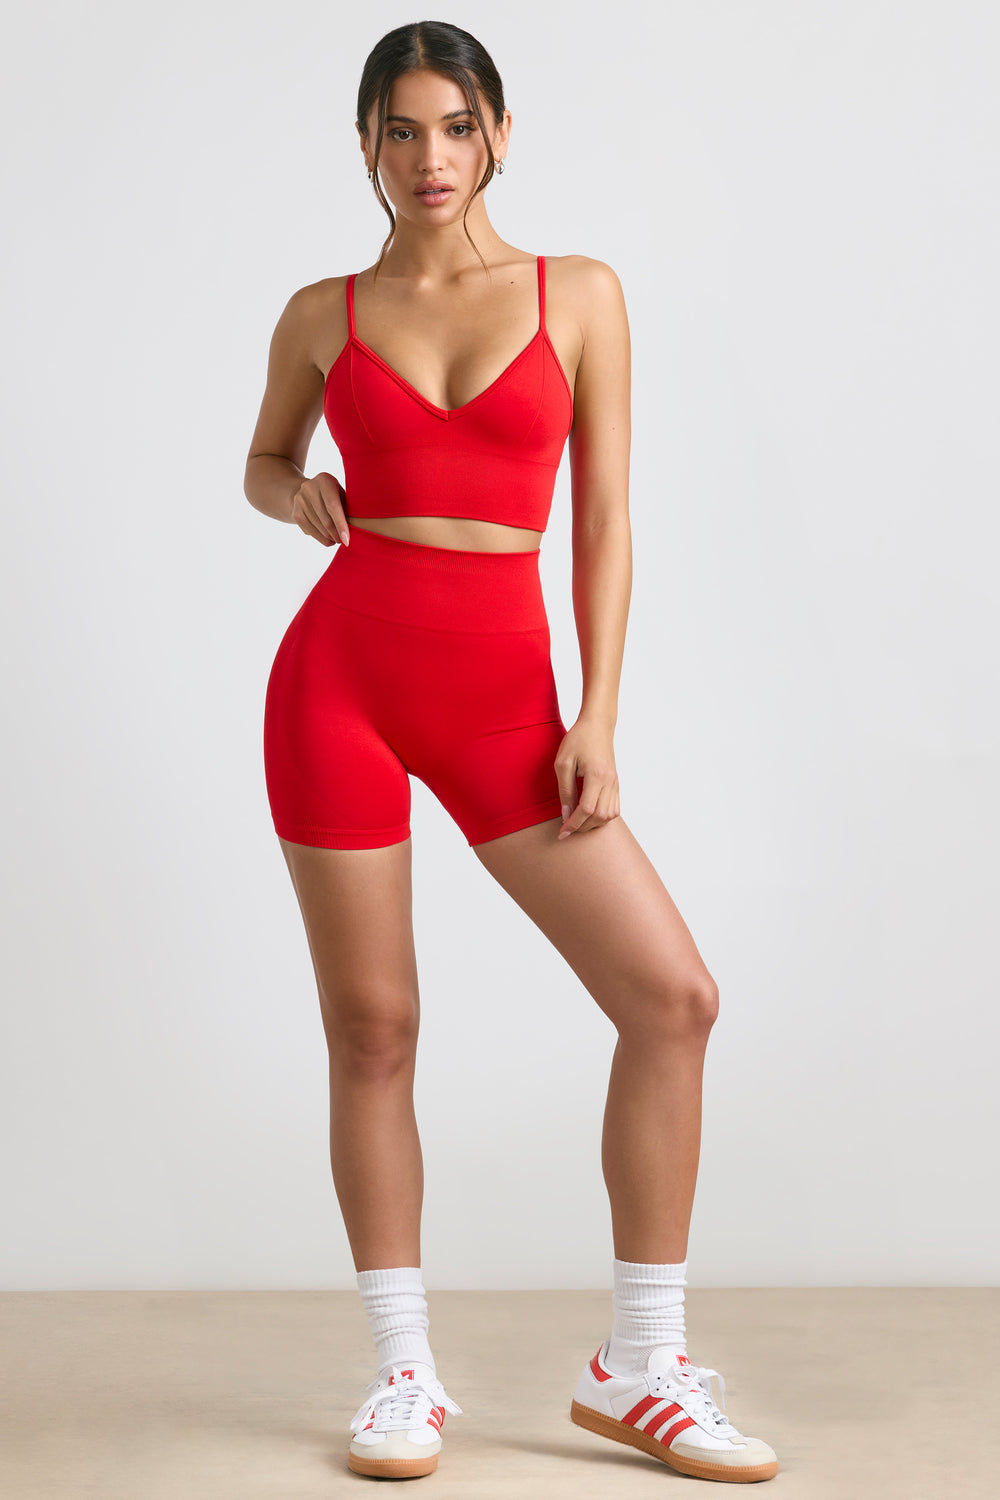 Admired High-Waist Define Luxe Leggings in Red